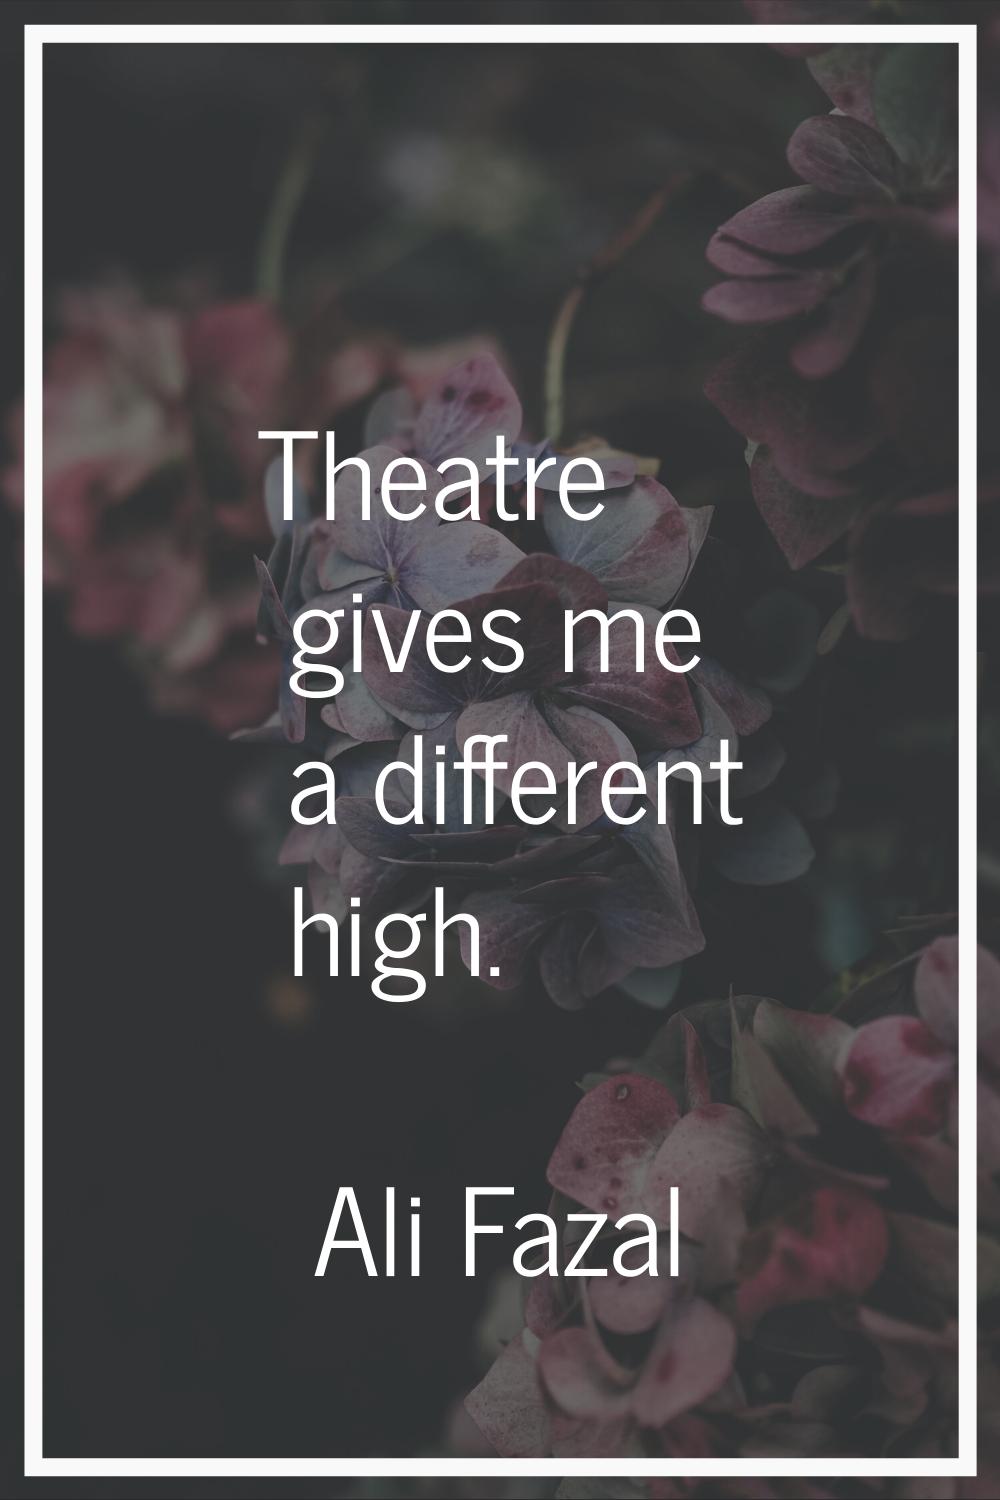 Theatre gives me a different high.